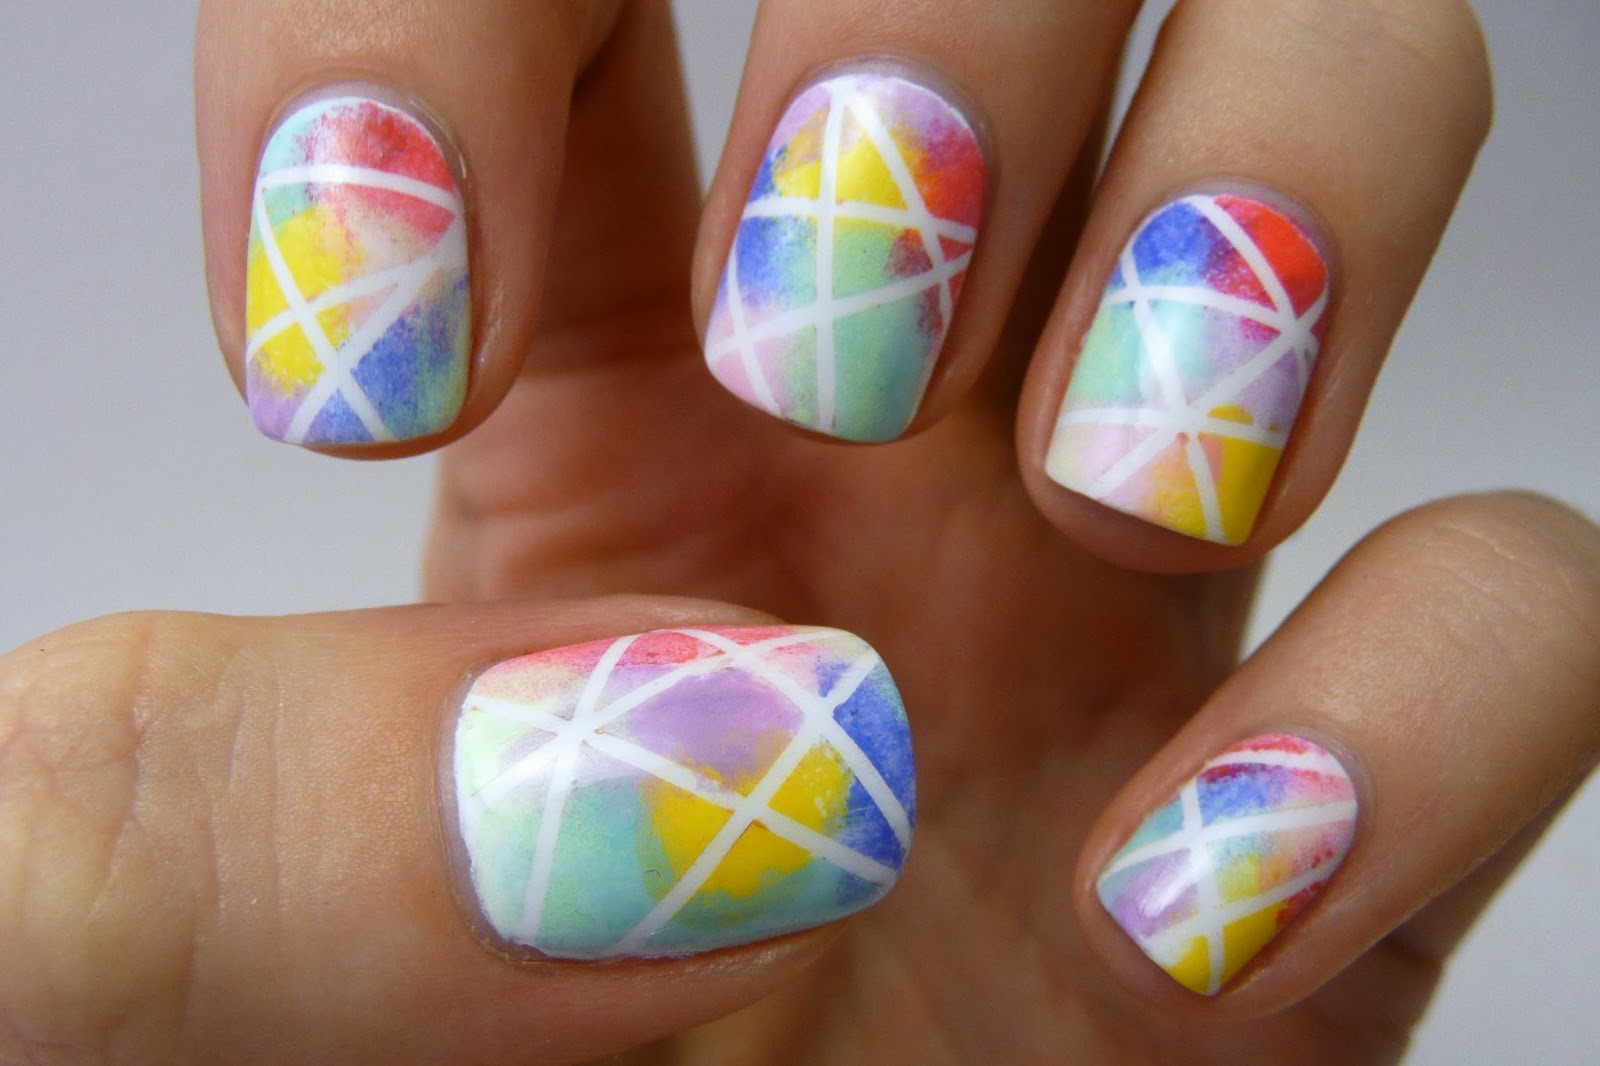 1. Nail Art Striping Tape Designs - wide 3